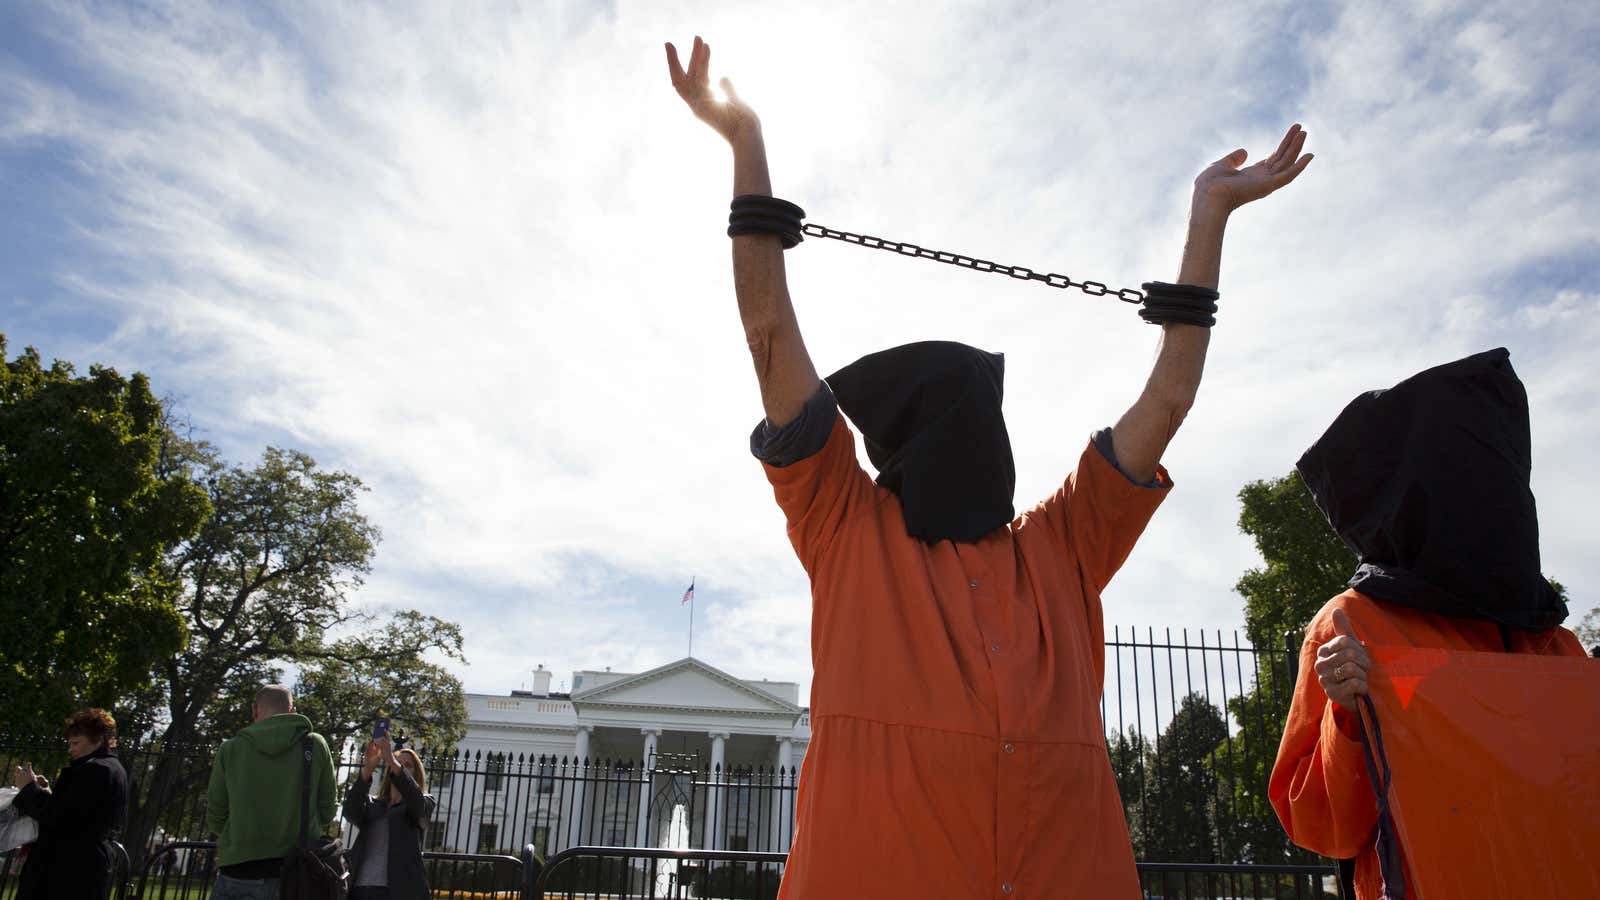 People protest against “indefinite detentions” at Guantanamo Bay detention center outside of the White House in Washington, DC, in Oct. 2014.